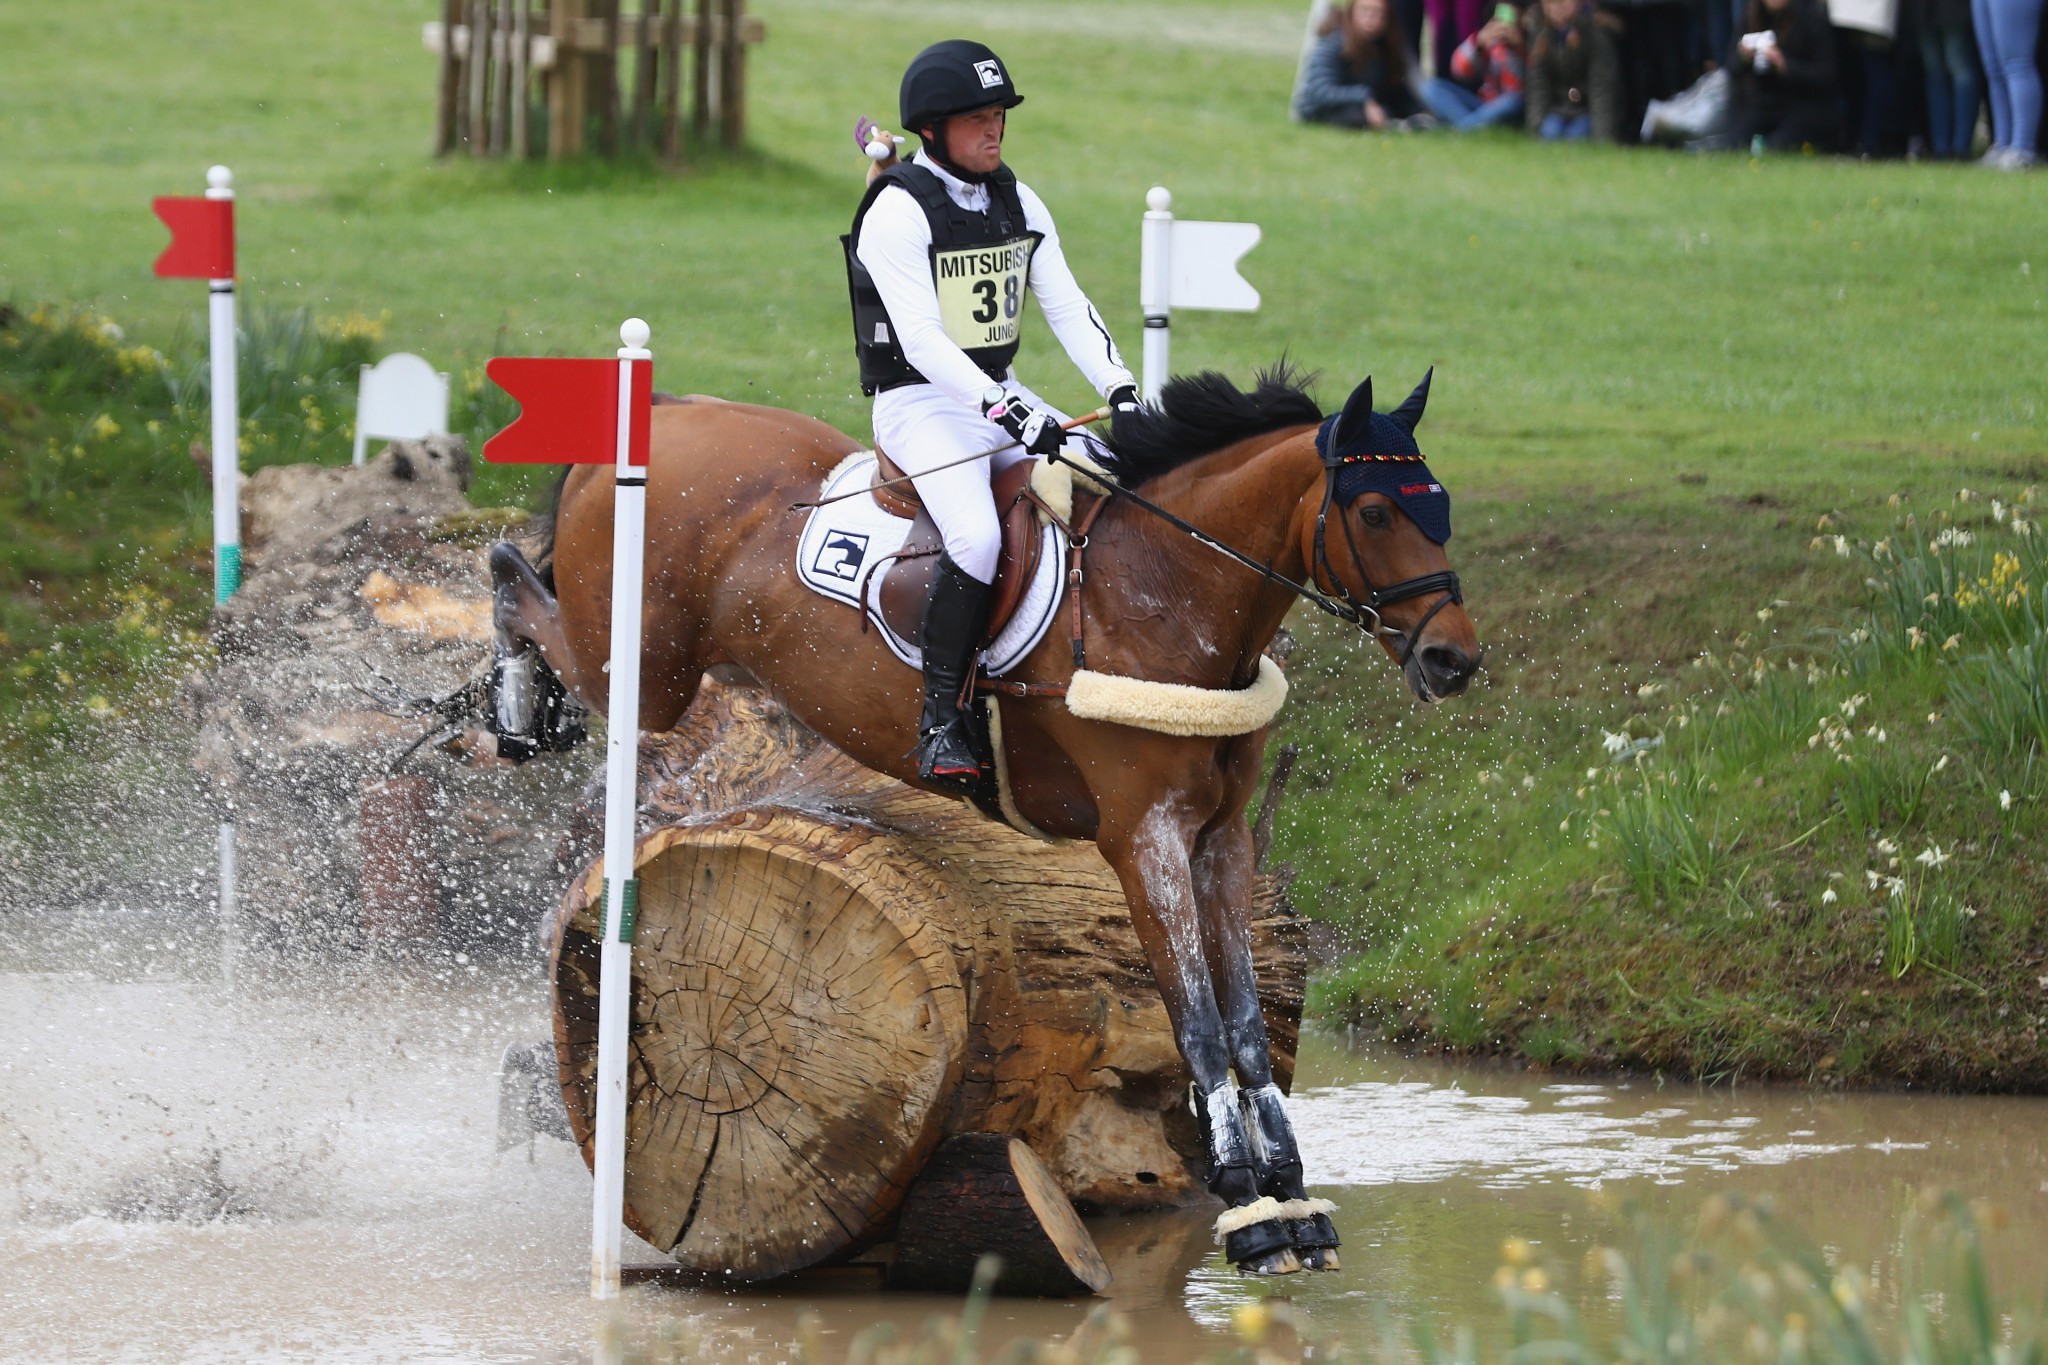 Jung eyes fourth consecutive European eventing crown